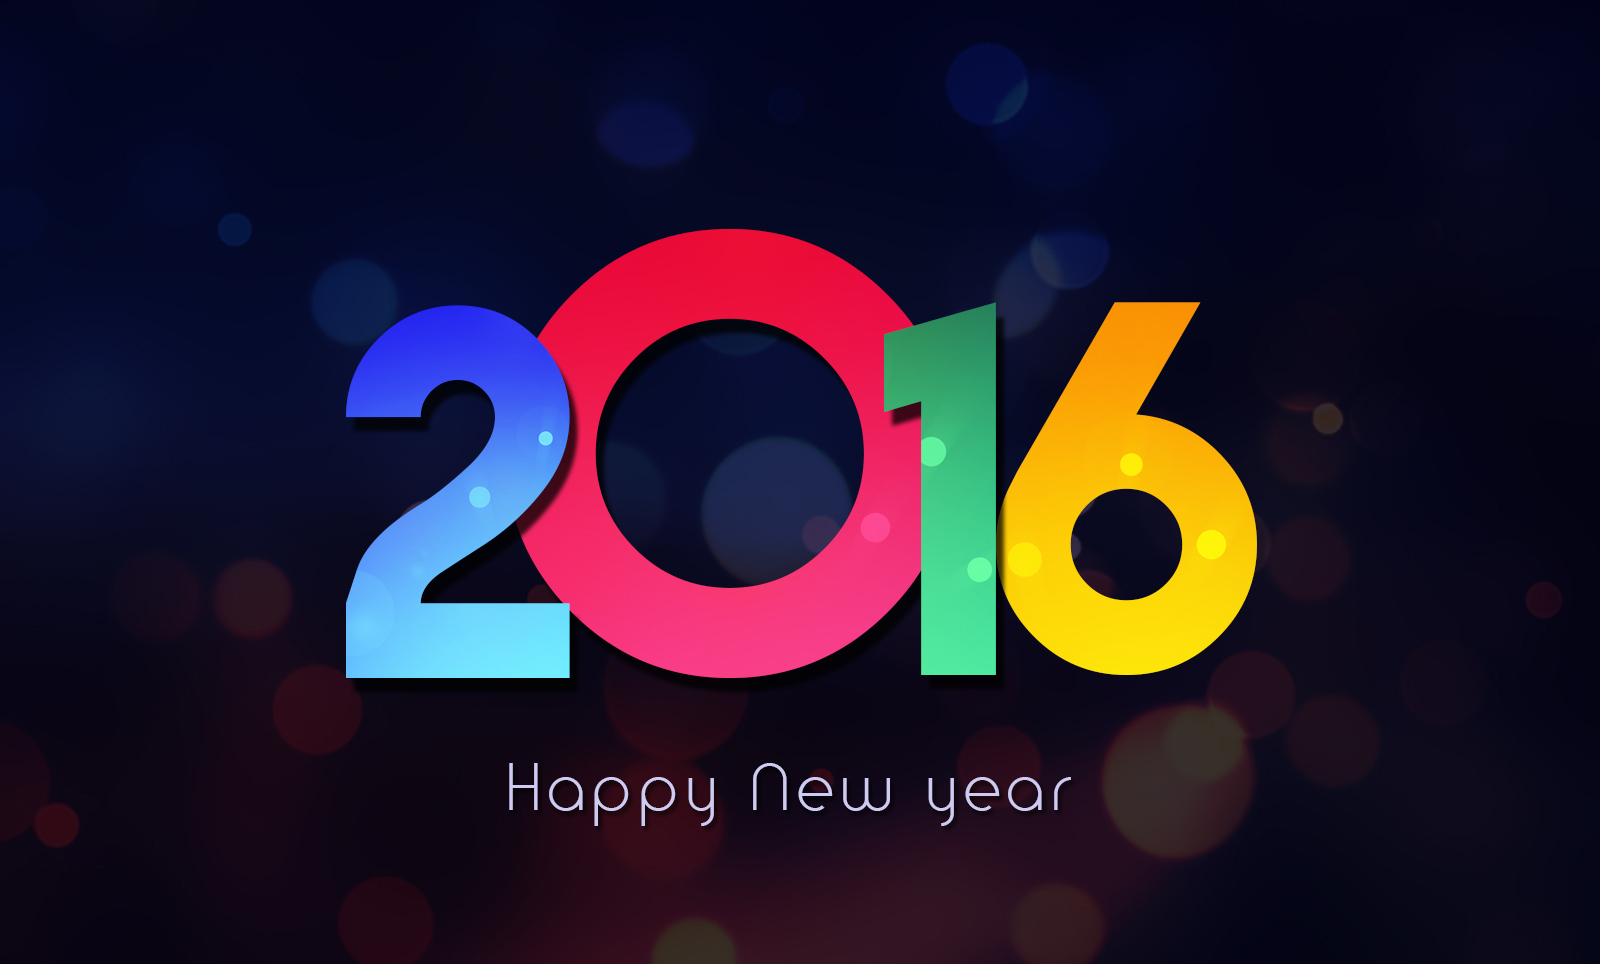 Happy New Year 2016 Wallpapers In Hd - Graphic Design - HD Wallpaper 